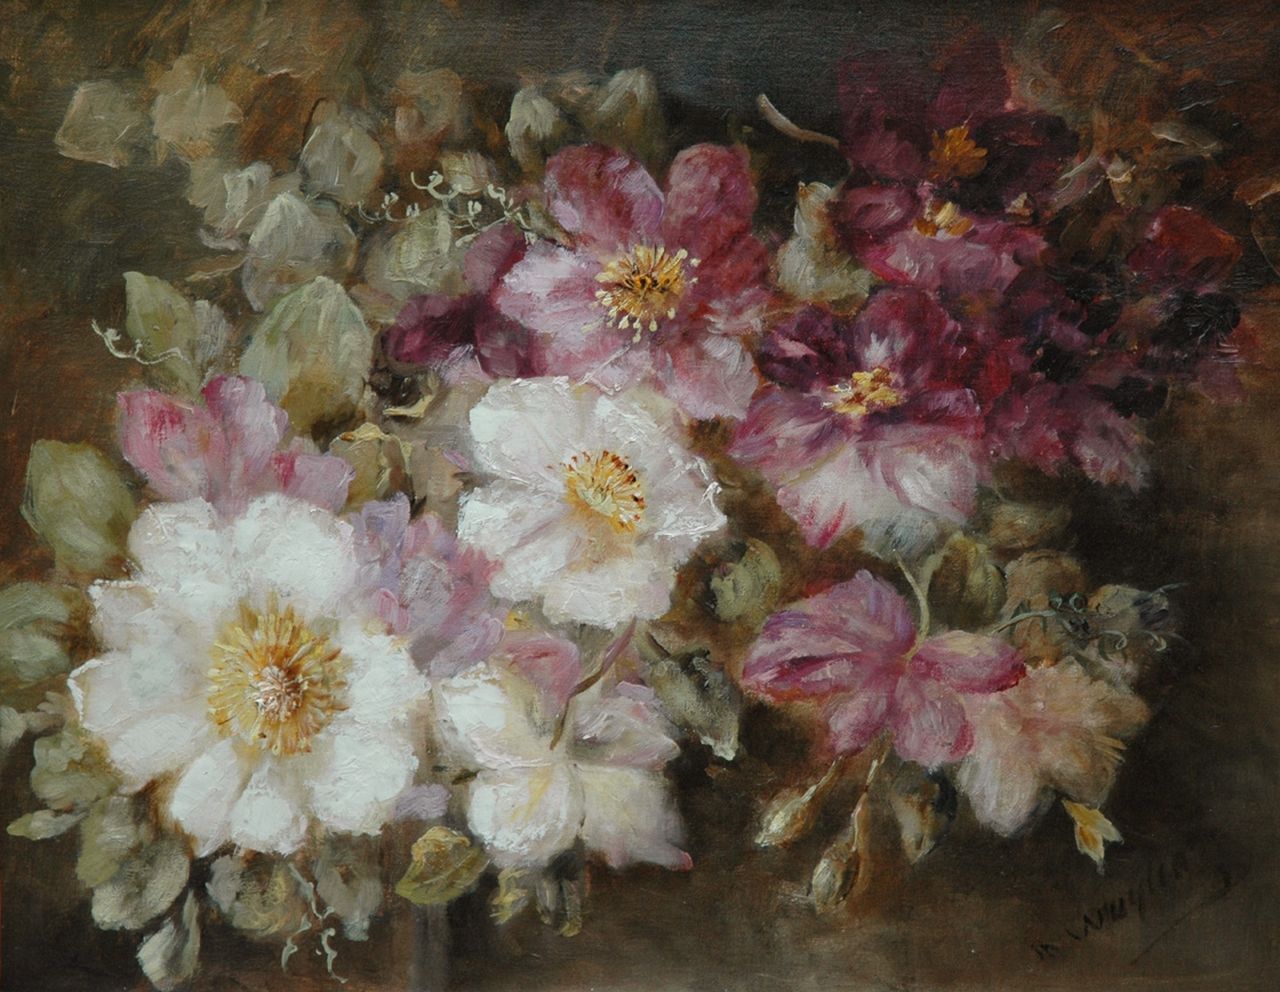 Wuytiers-Blaauw A.M.  | Anna Maria 'Marie' Wuytiers-Blaauw, Clematis, oil on canvas 43.1 x 55.1 cm, signed l.r.